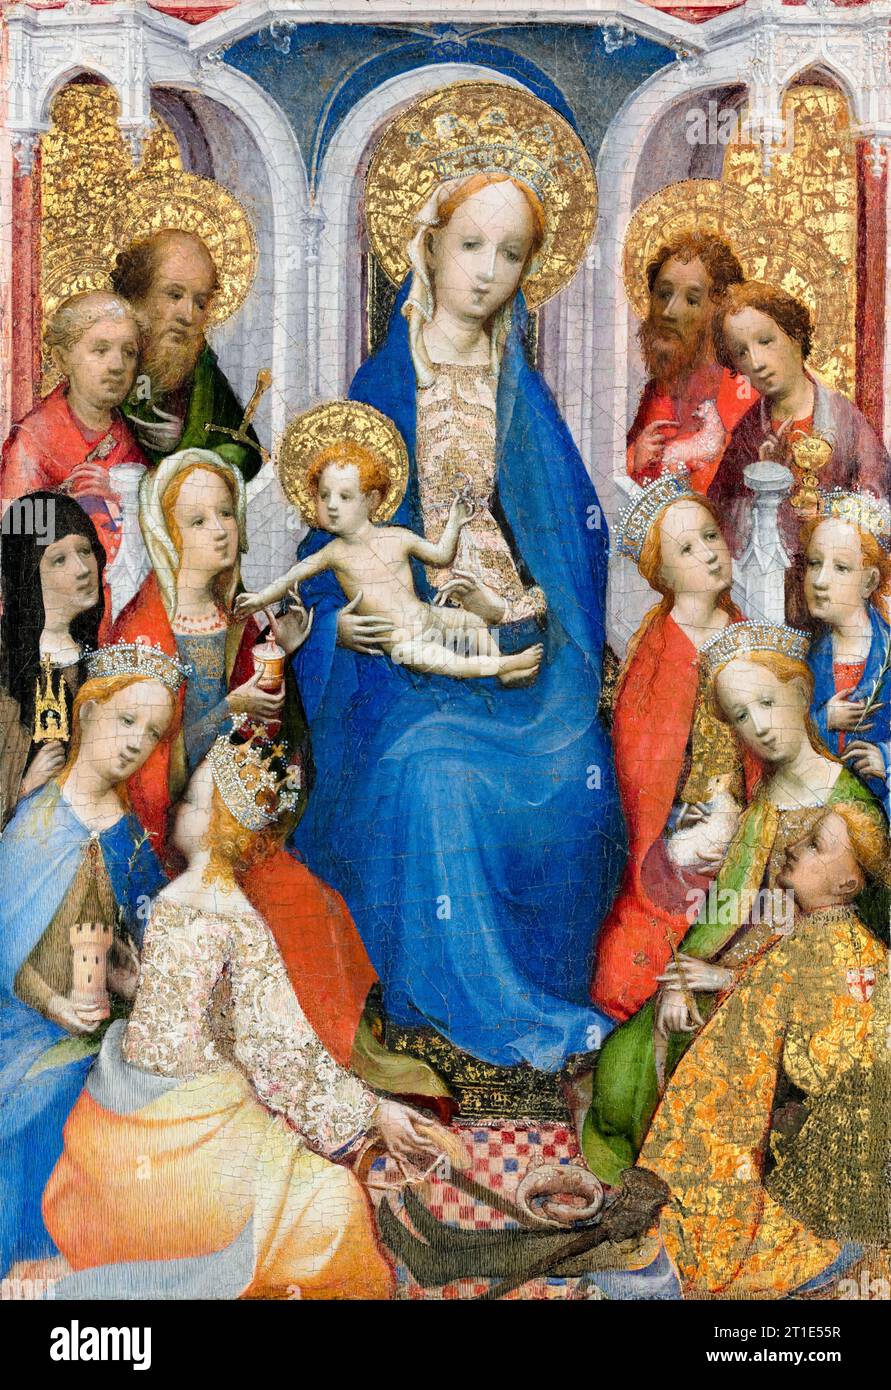 Master of Saint Veronica (attributed), Enthroned Virgin and Child with Saints, Paul, Peter, Clare of Assisi, Mary Magdalene, Barbara, Catherine of Alexandria, John the Baptist, John the Evangelist, Agnes, Cecilia, Margaret of Antioch, and George, painting in oil and gold on panel, 1400-1410 Stock Photo